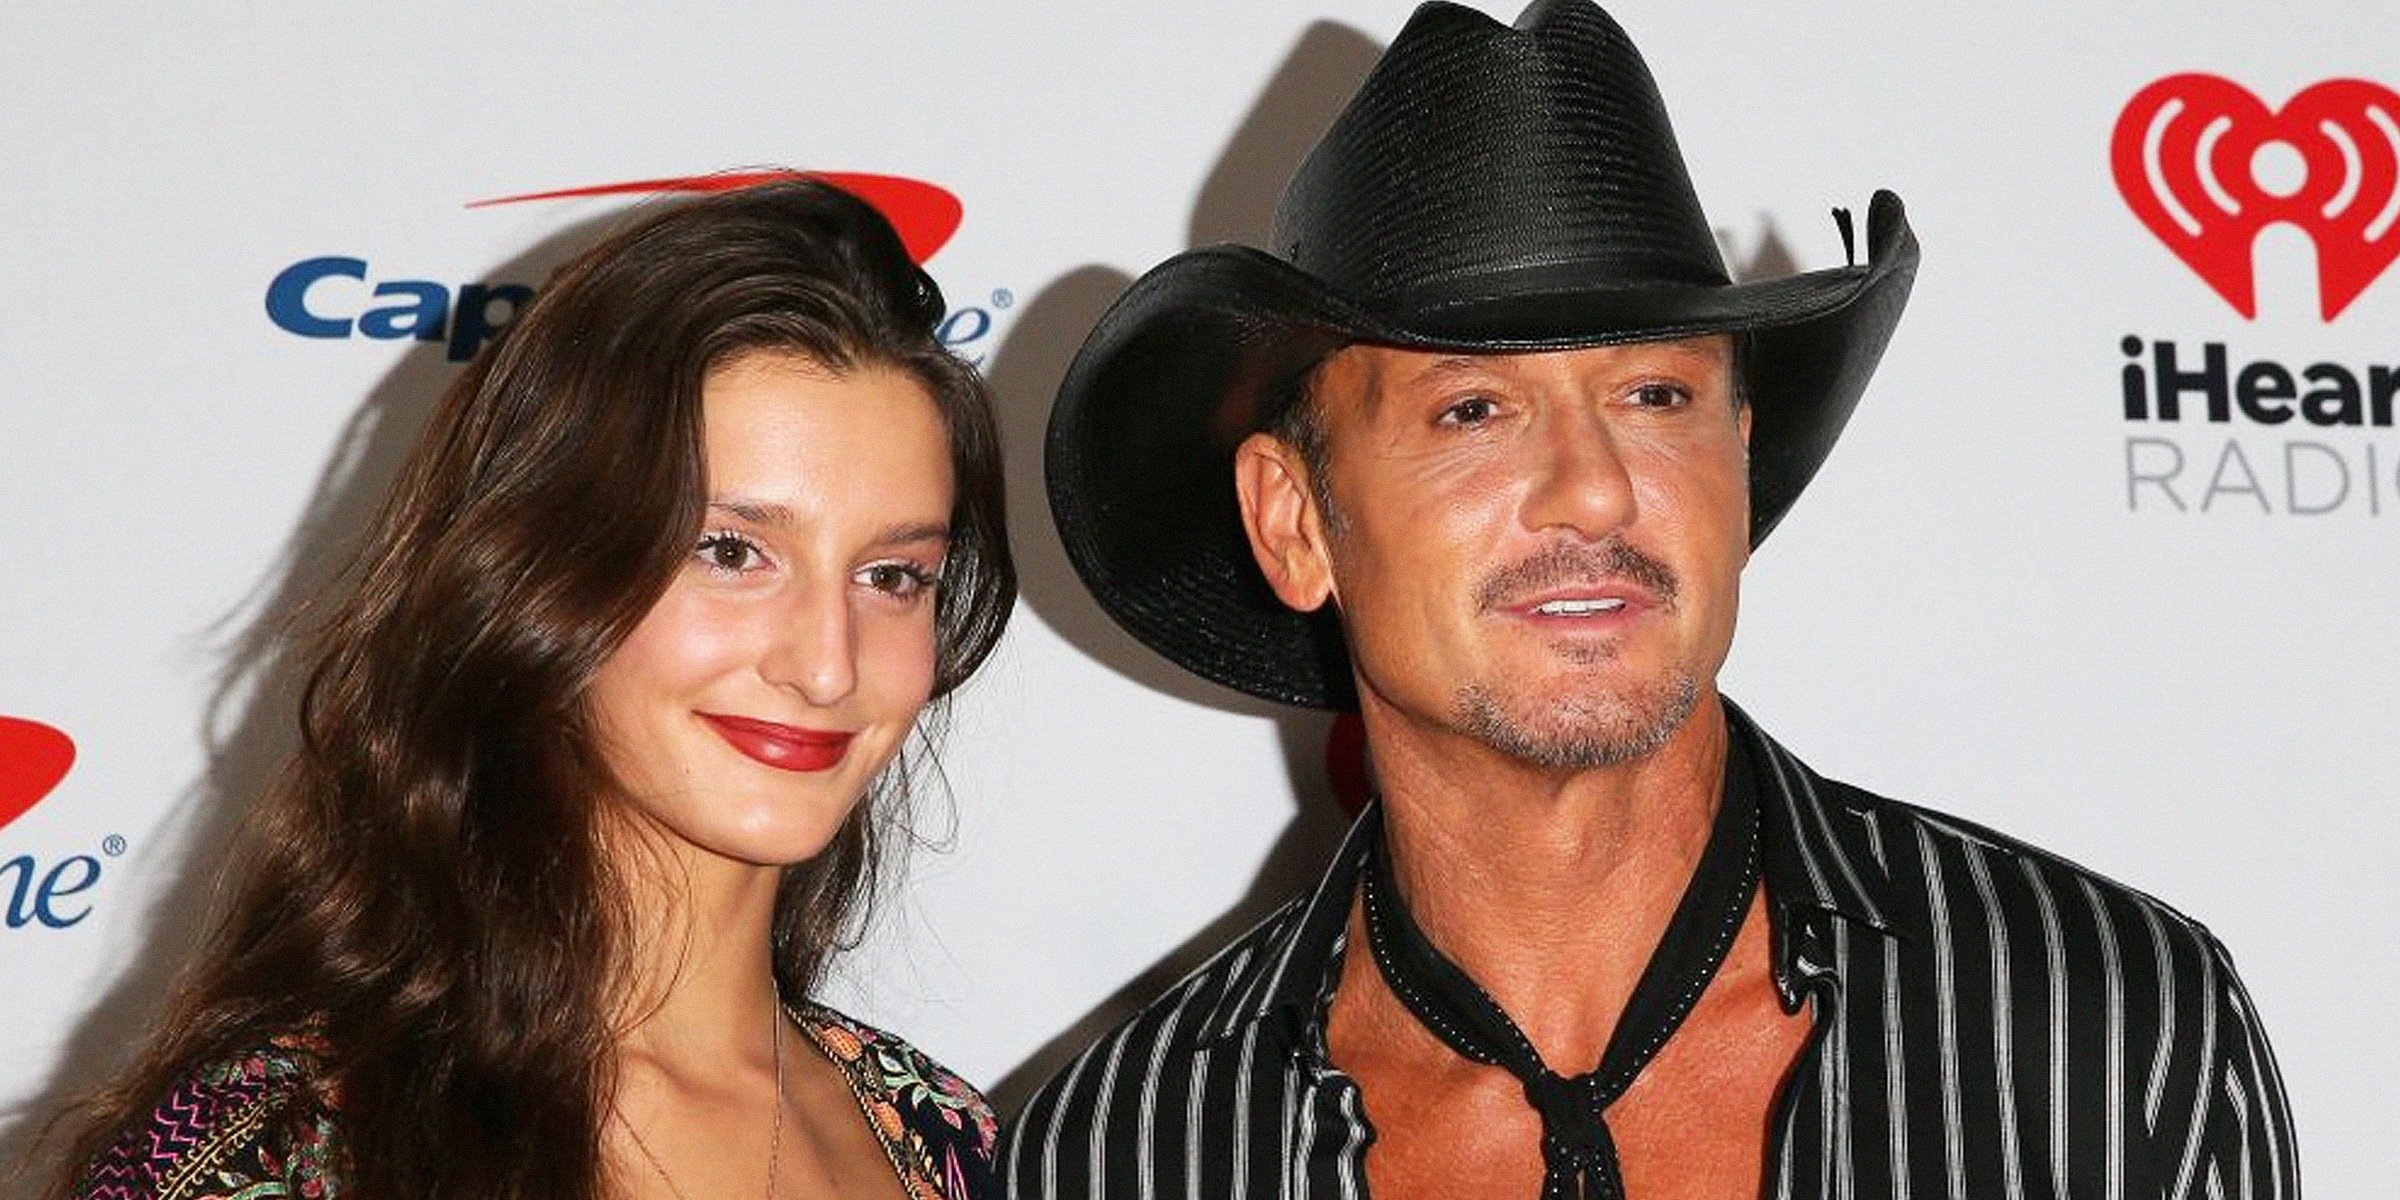 No Morals': Tim McGraw's Daughter Blasted for Showing Her Body in Photos  Yet Dad Supports His 'Little Girl'